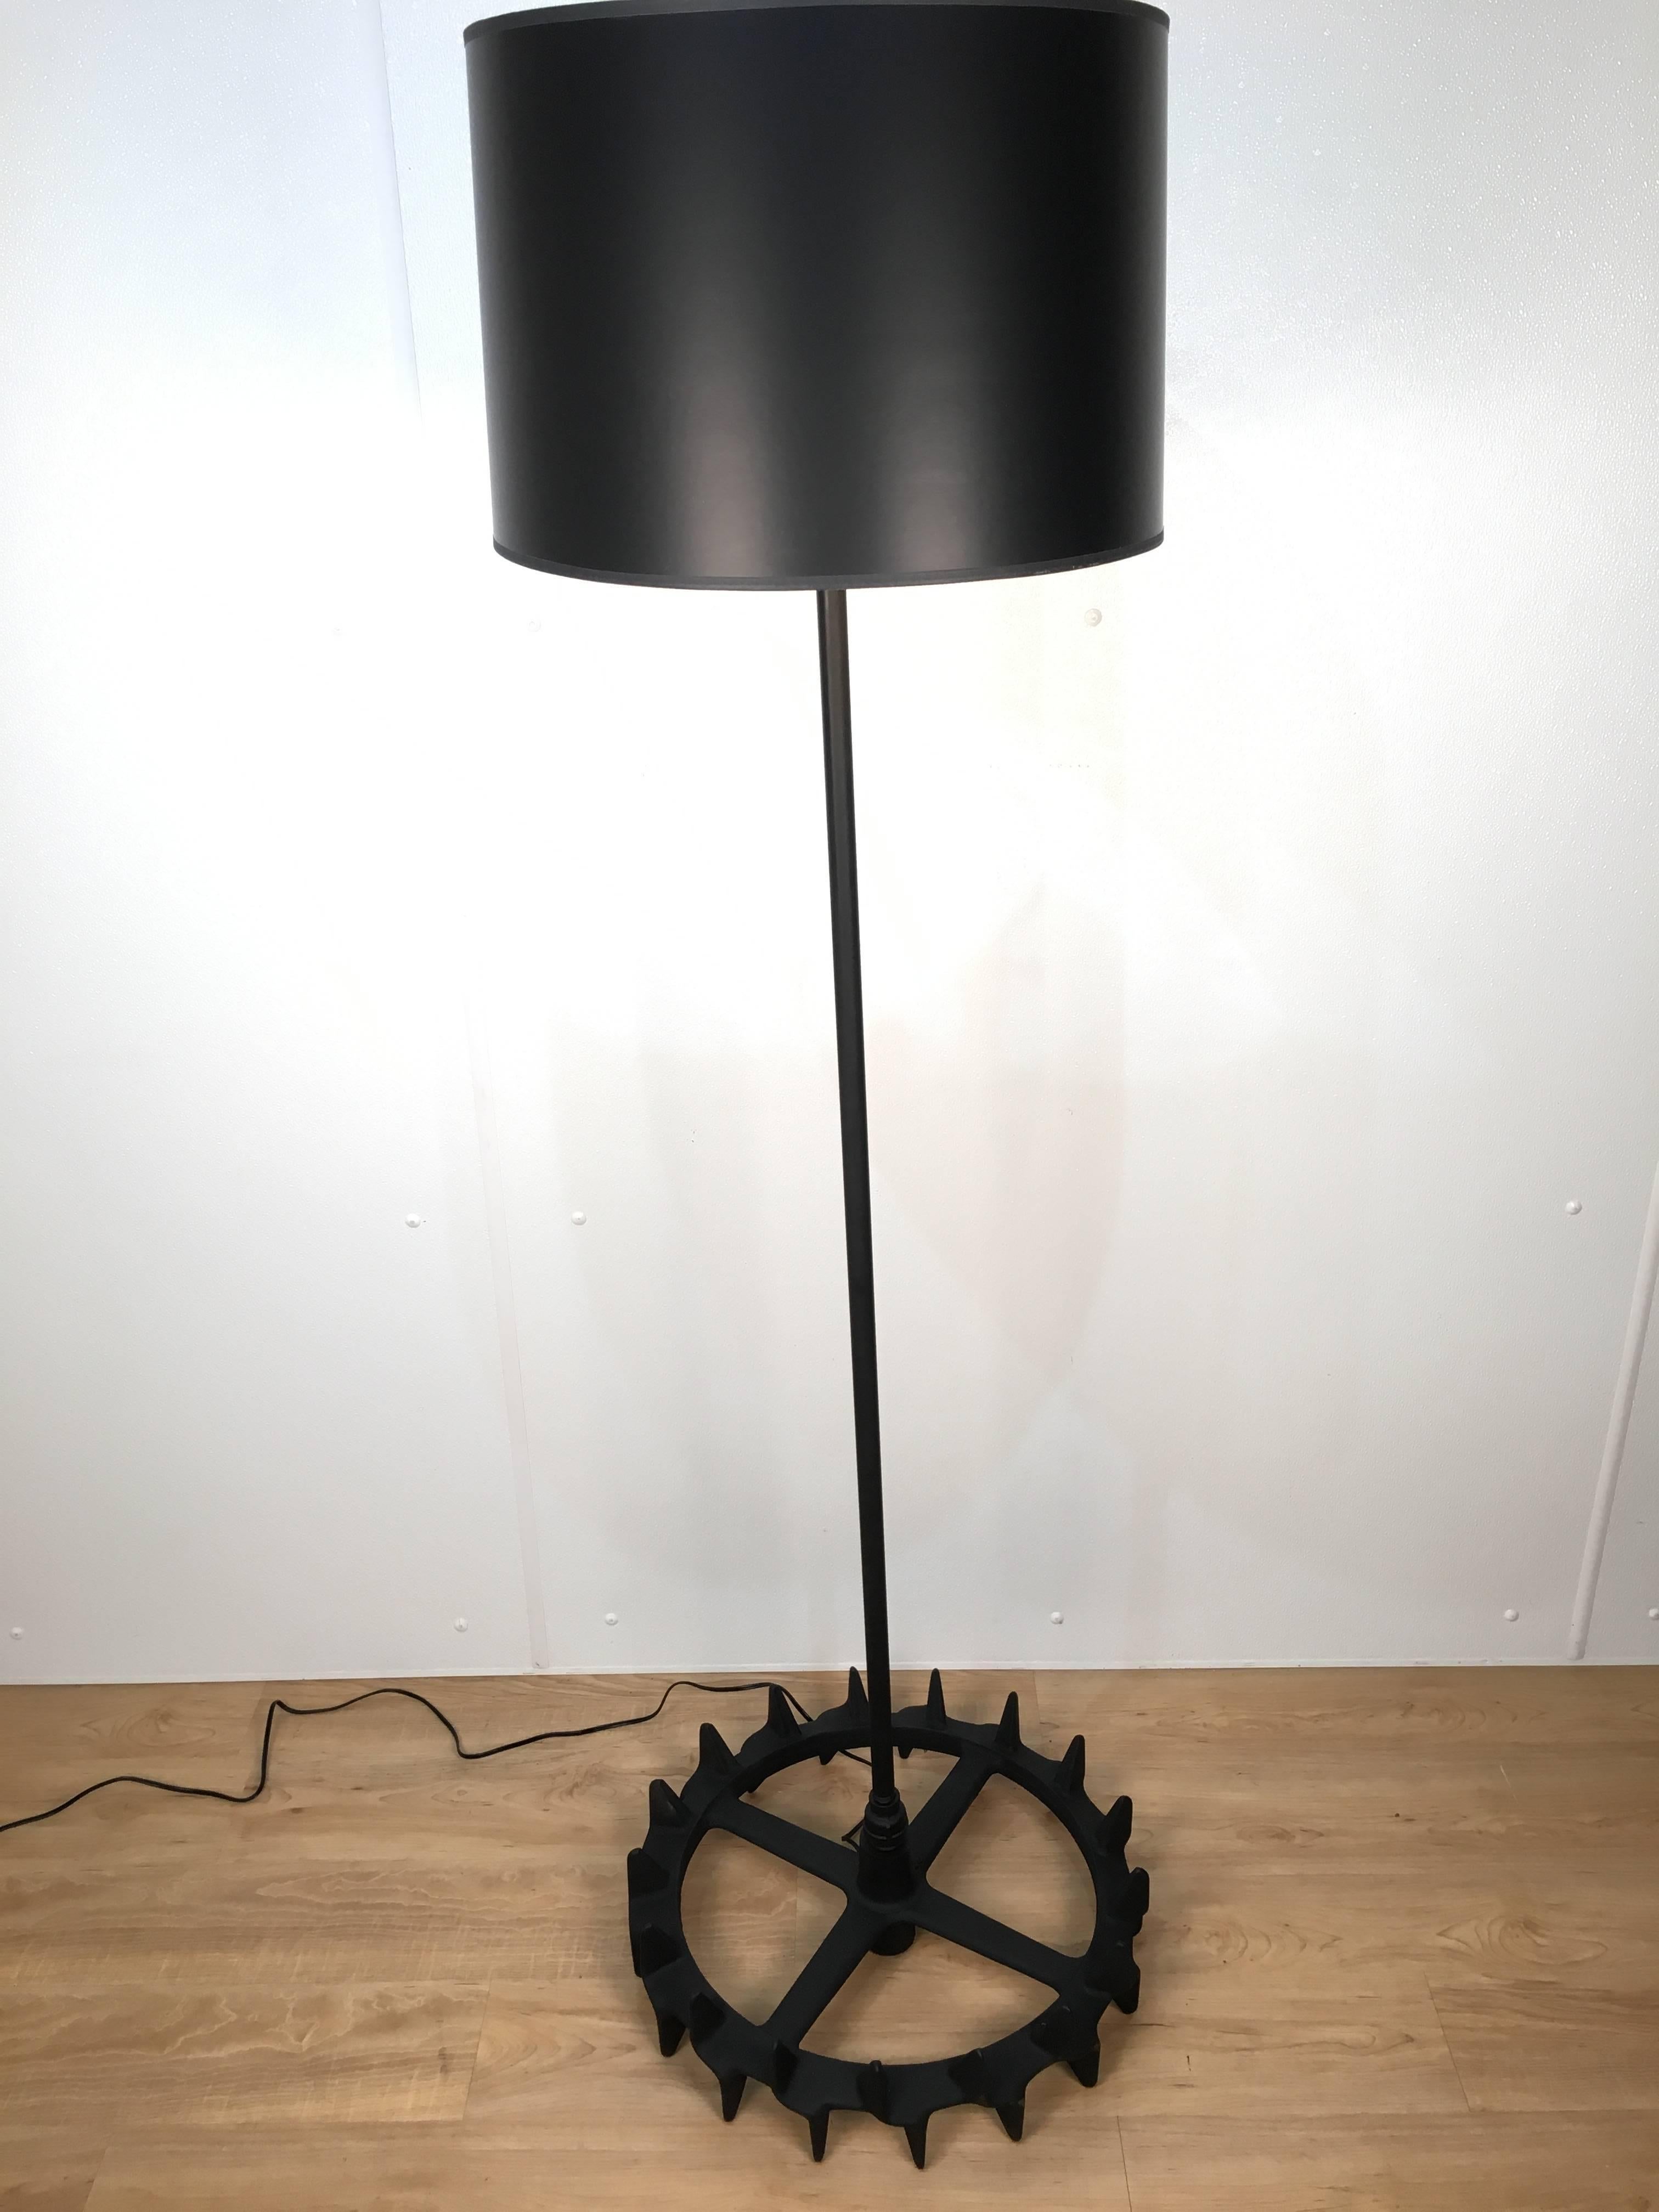 Pair of heavy industrial iron gear floor lamps. One of a kind repurposed gear base and iron body. Black powder coated finish and newly wired. Alternating gear tips have rounded ends and are not sharp. Each gear is stamped and dated 1926. Shades for